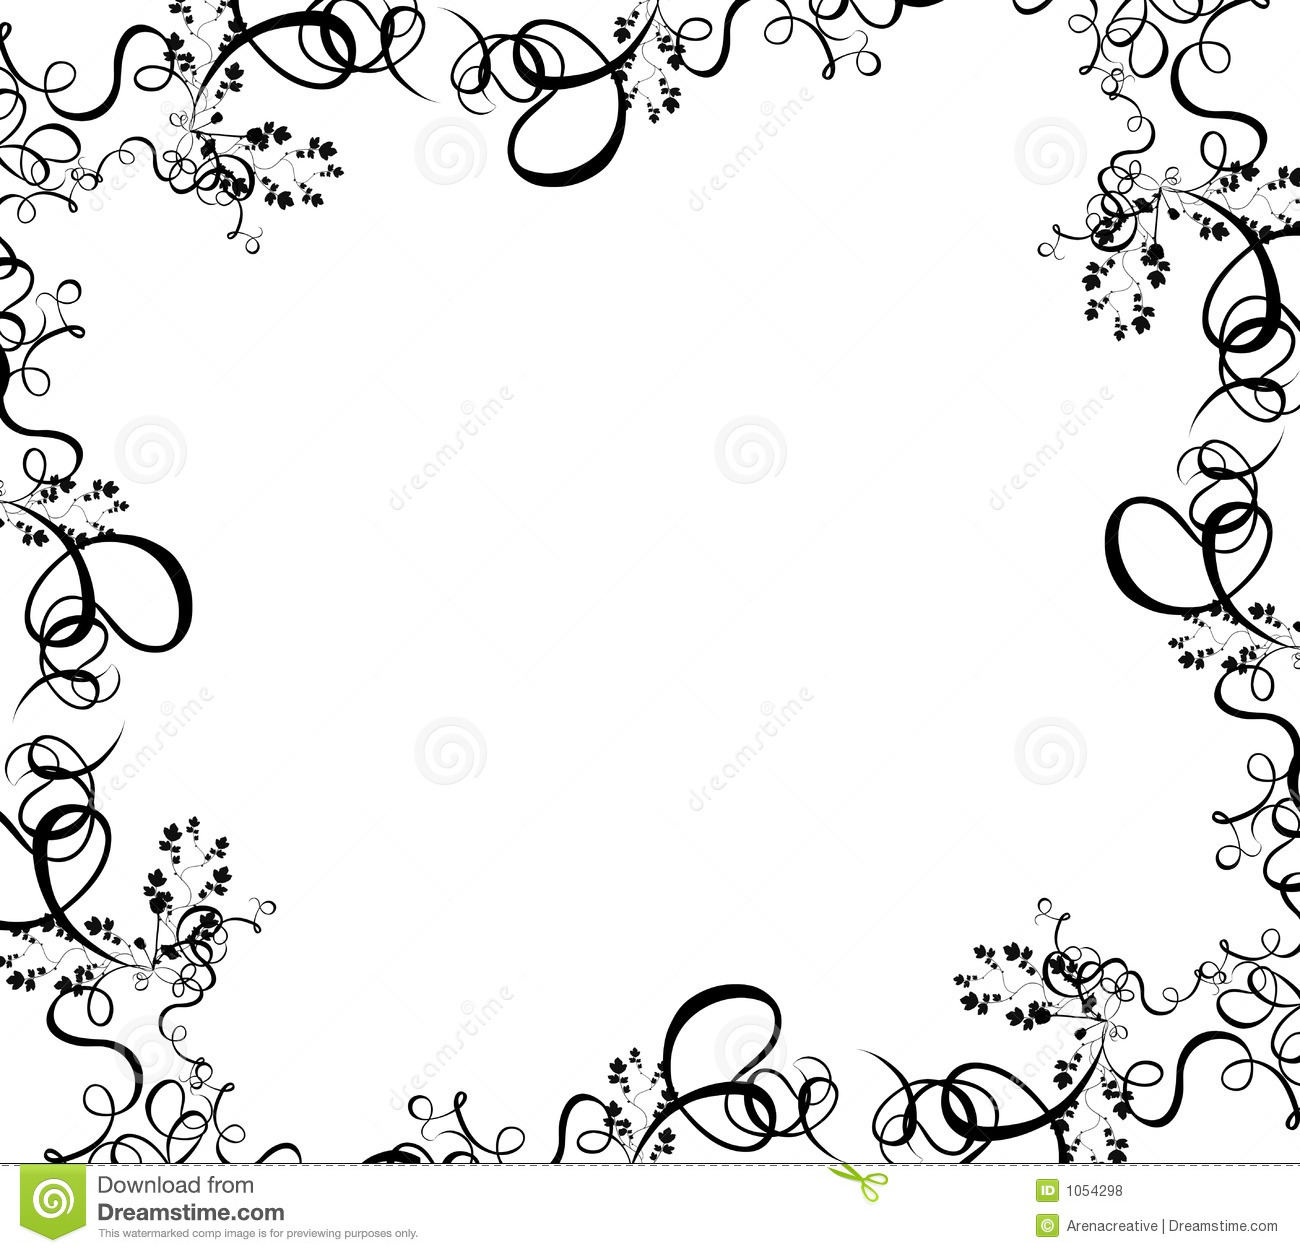 Summer Border Clip Art Black And White Images   Pictures   Becuo